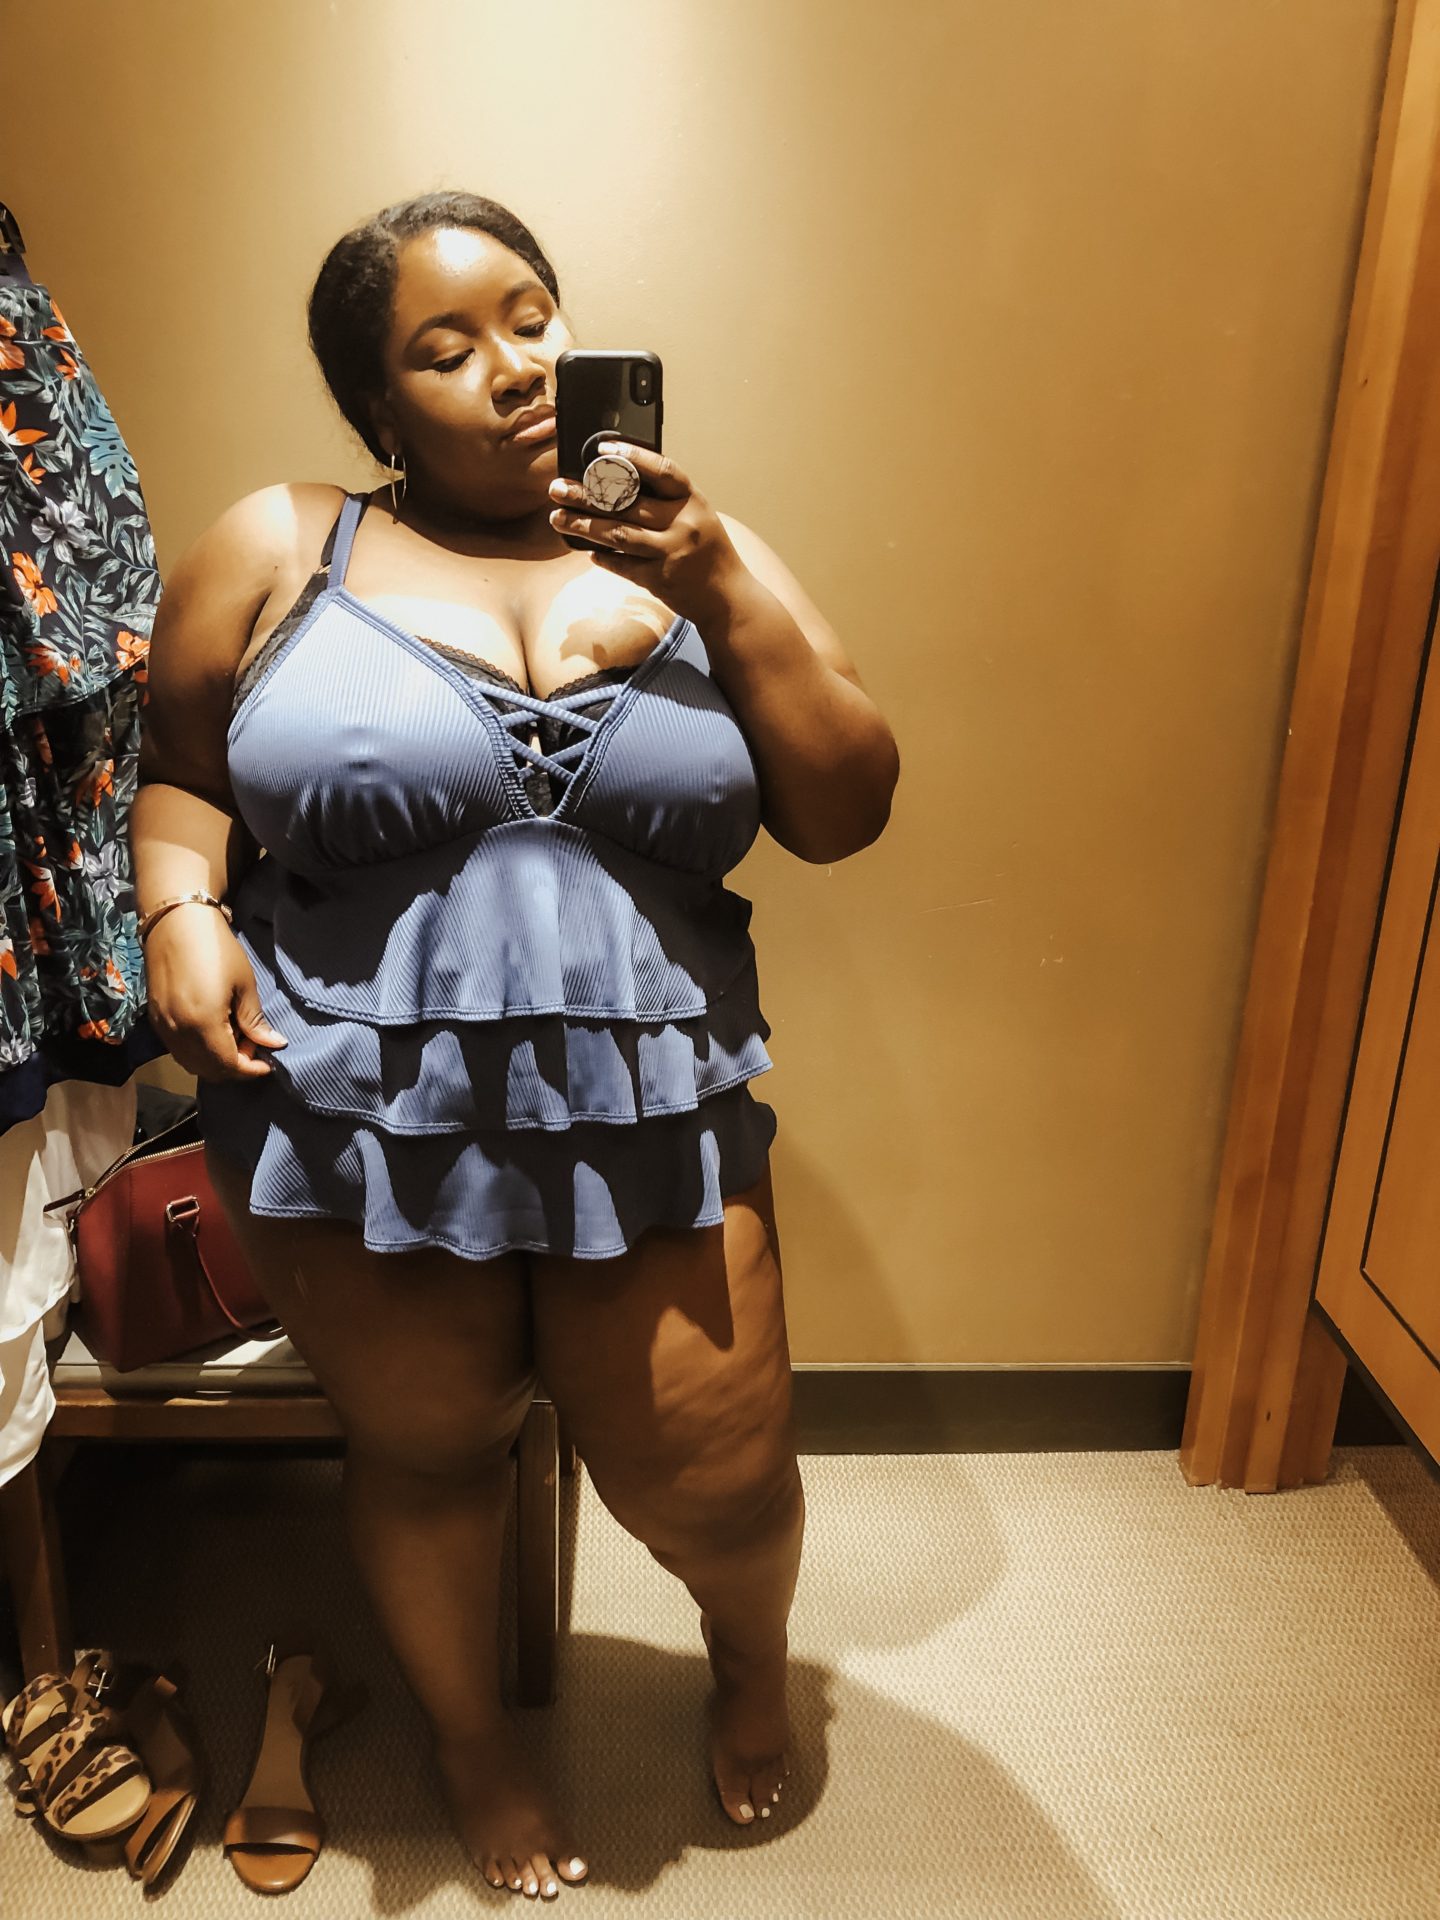 Plus Size Swimsuits for Summer & Body Insecurities - From Head To